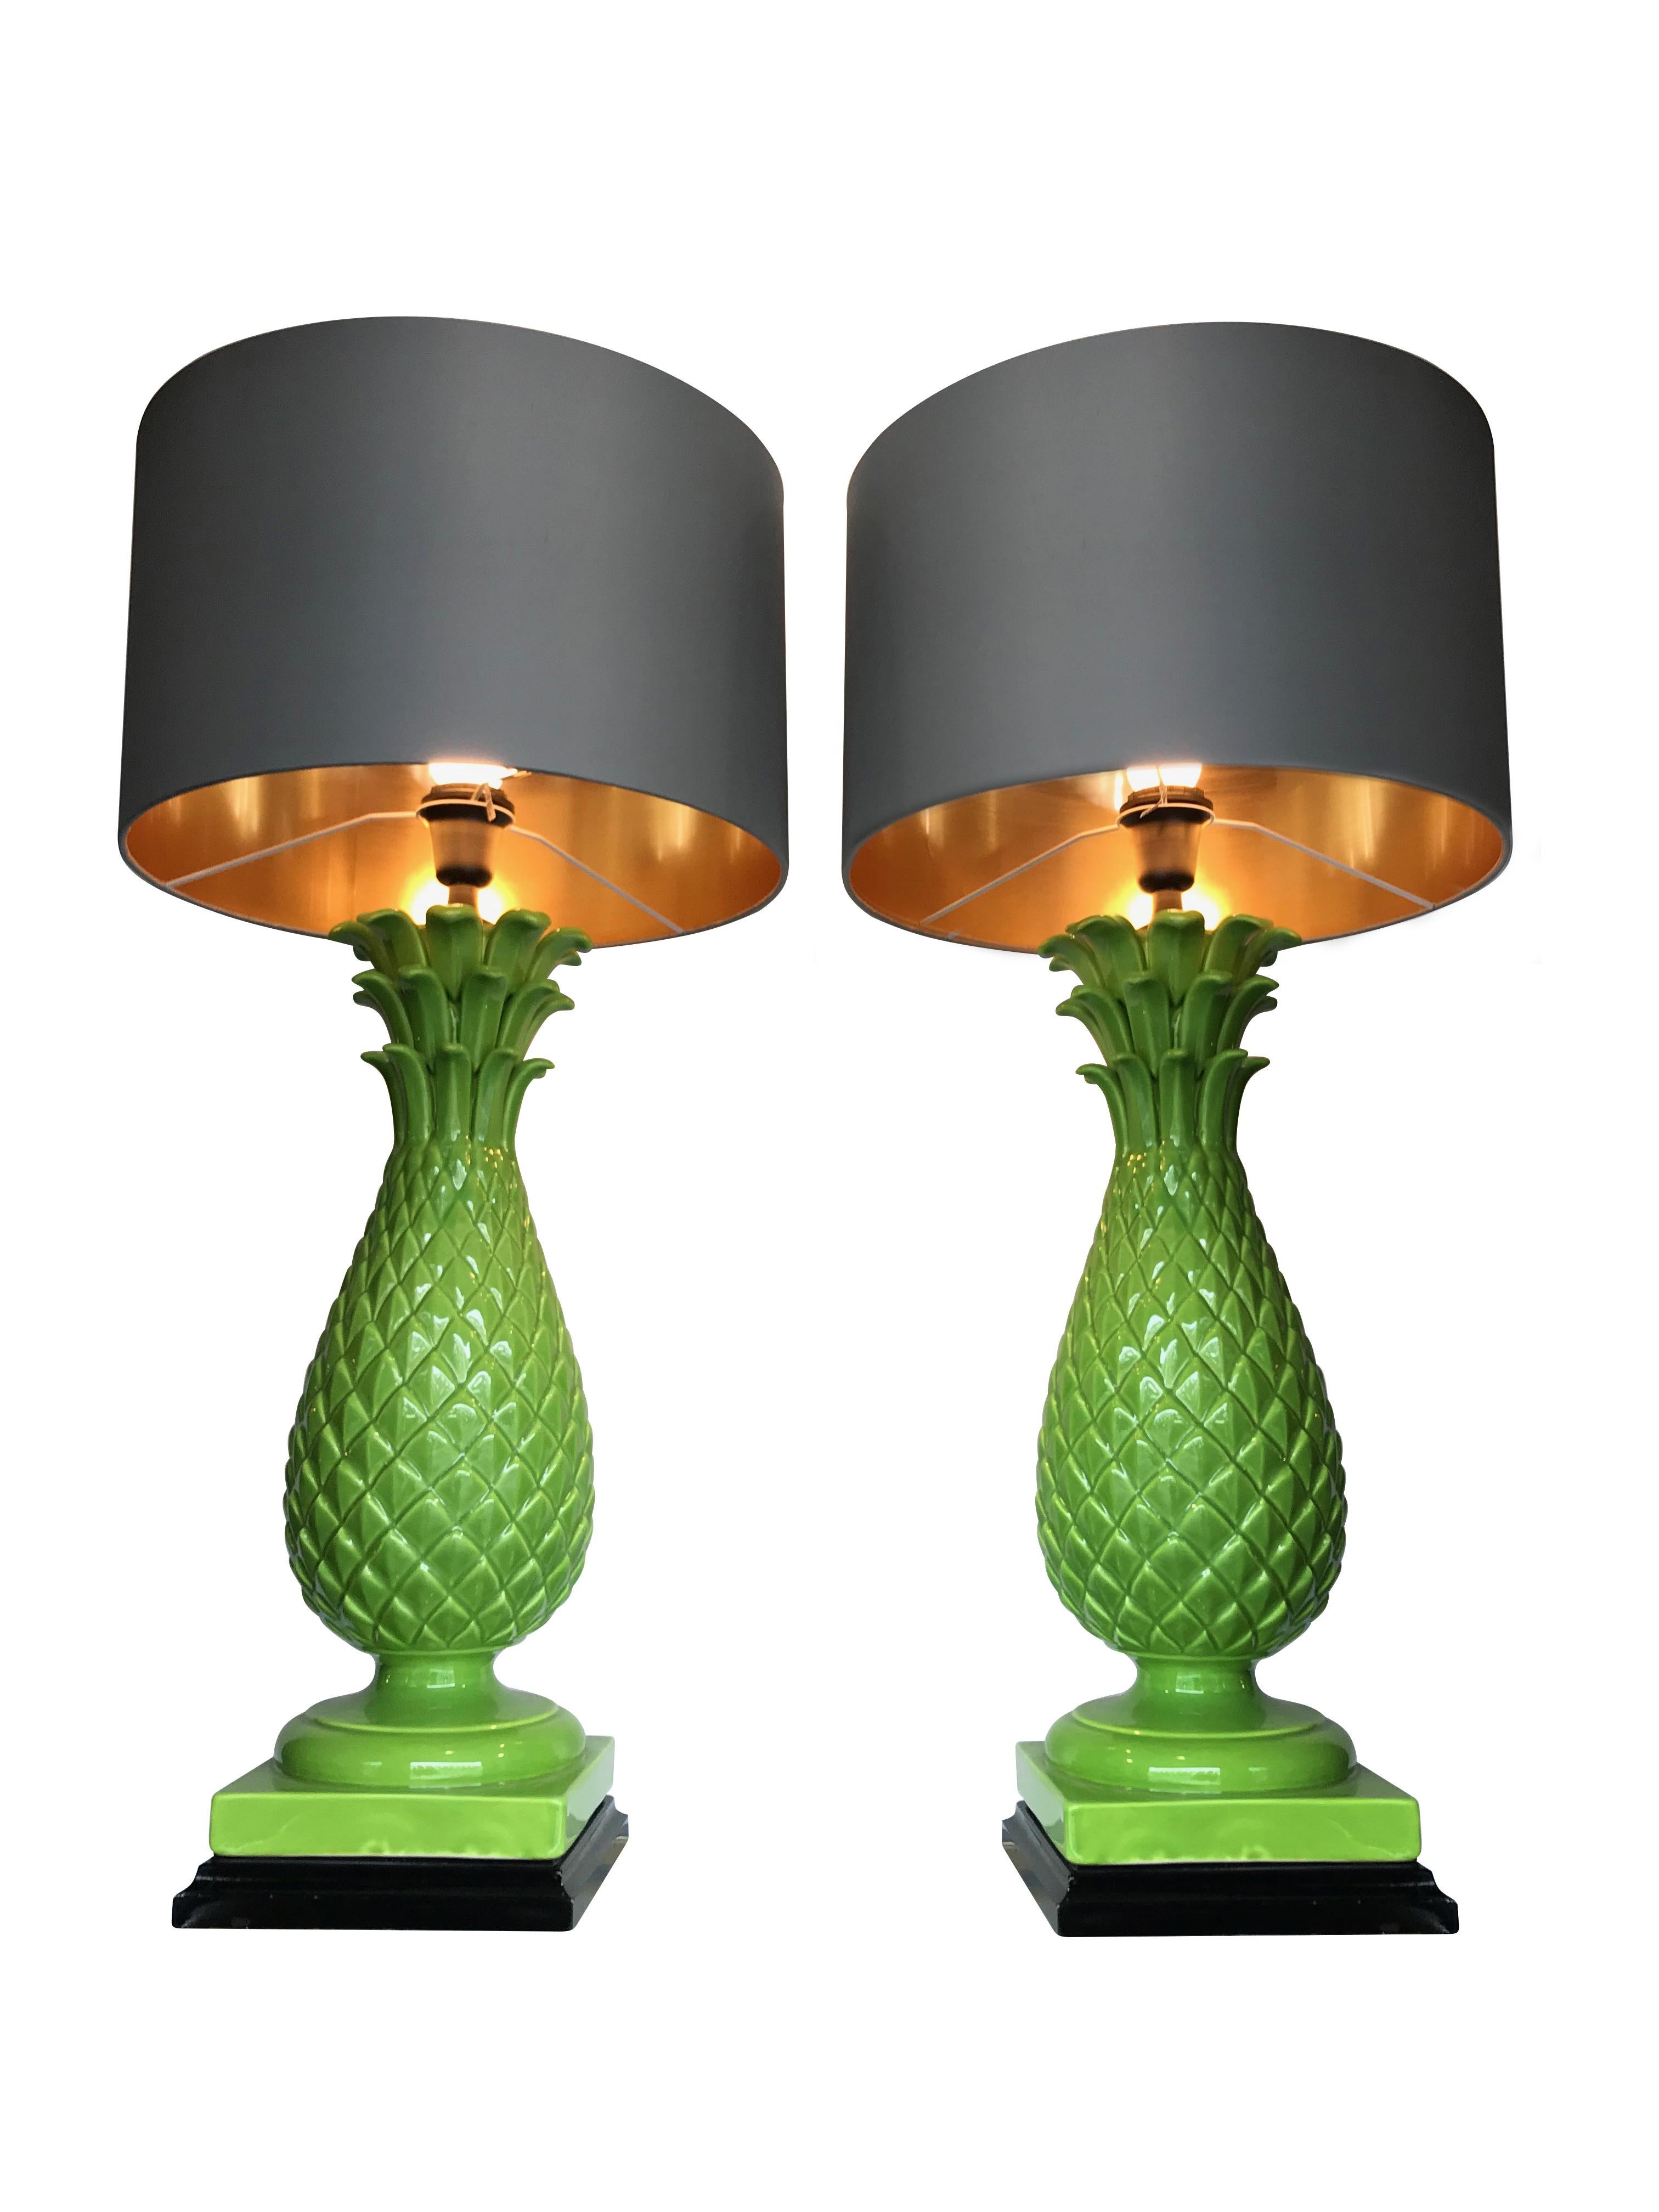 A pair of large Italian ceramic green pineapple lamps with black bases. Rewired with new chrome and black fittings, black antique cord flex and new switches. With new bespoke slate colored shades with gold linings.
 